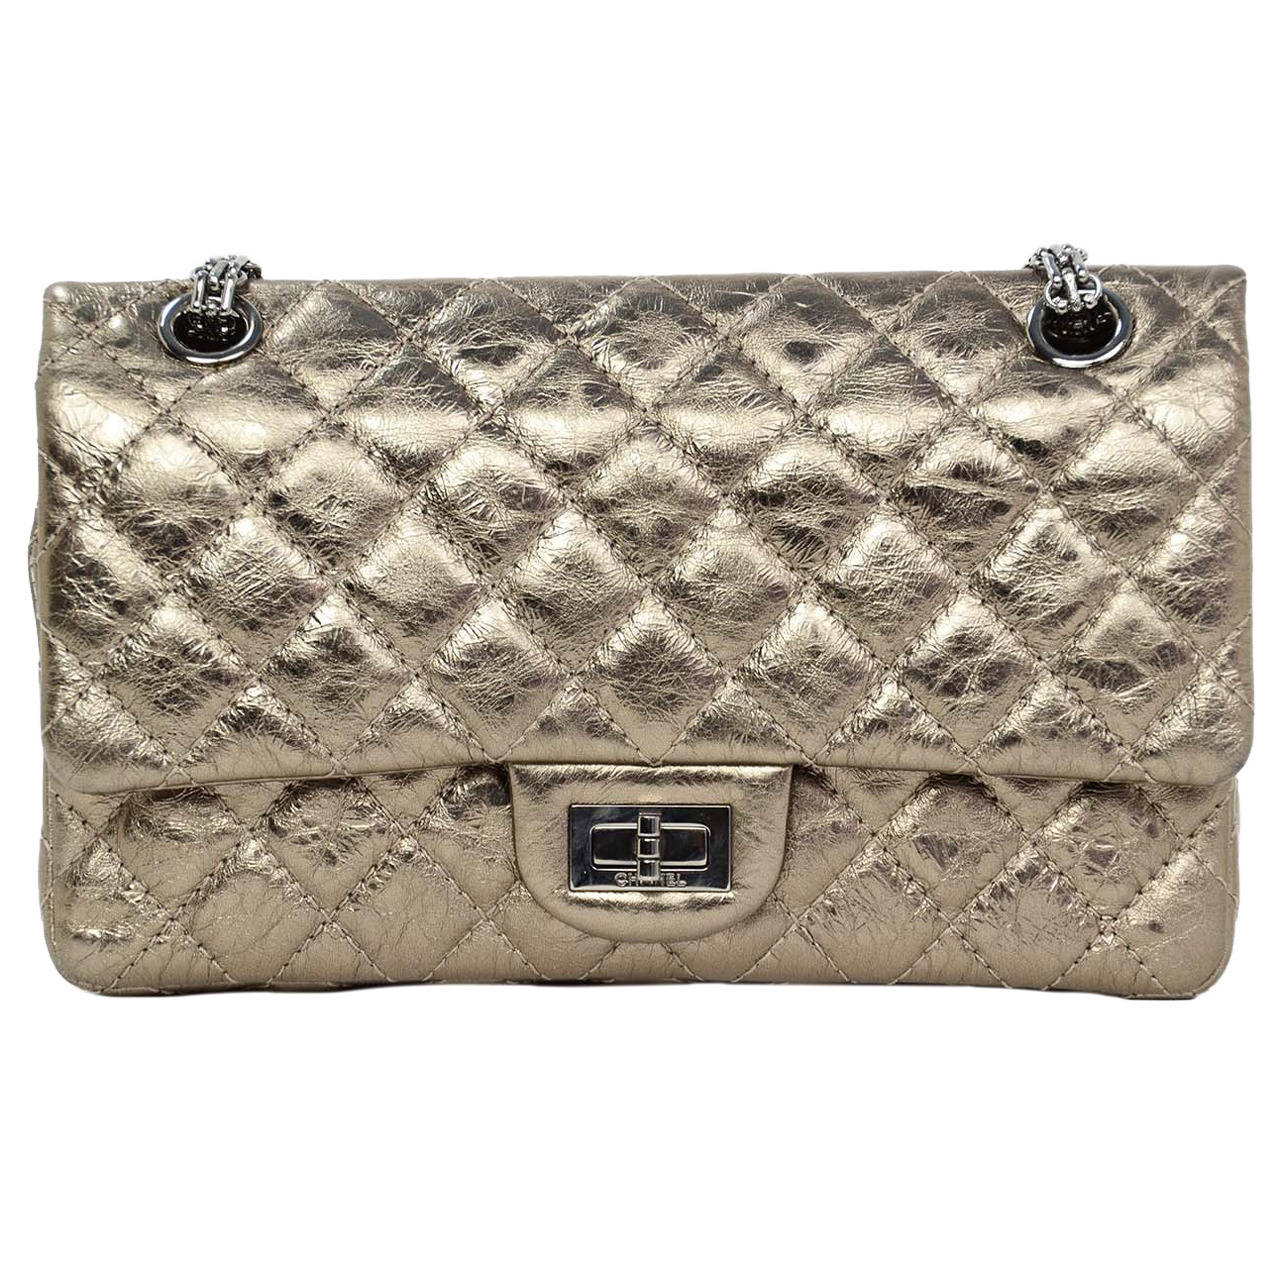 CHANEL Bronze Metallic Quilted Leather 2.55 225 Double Flap Classic Bag